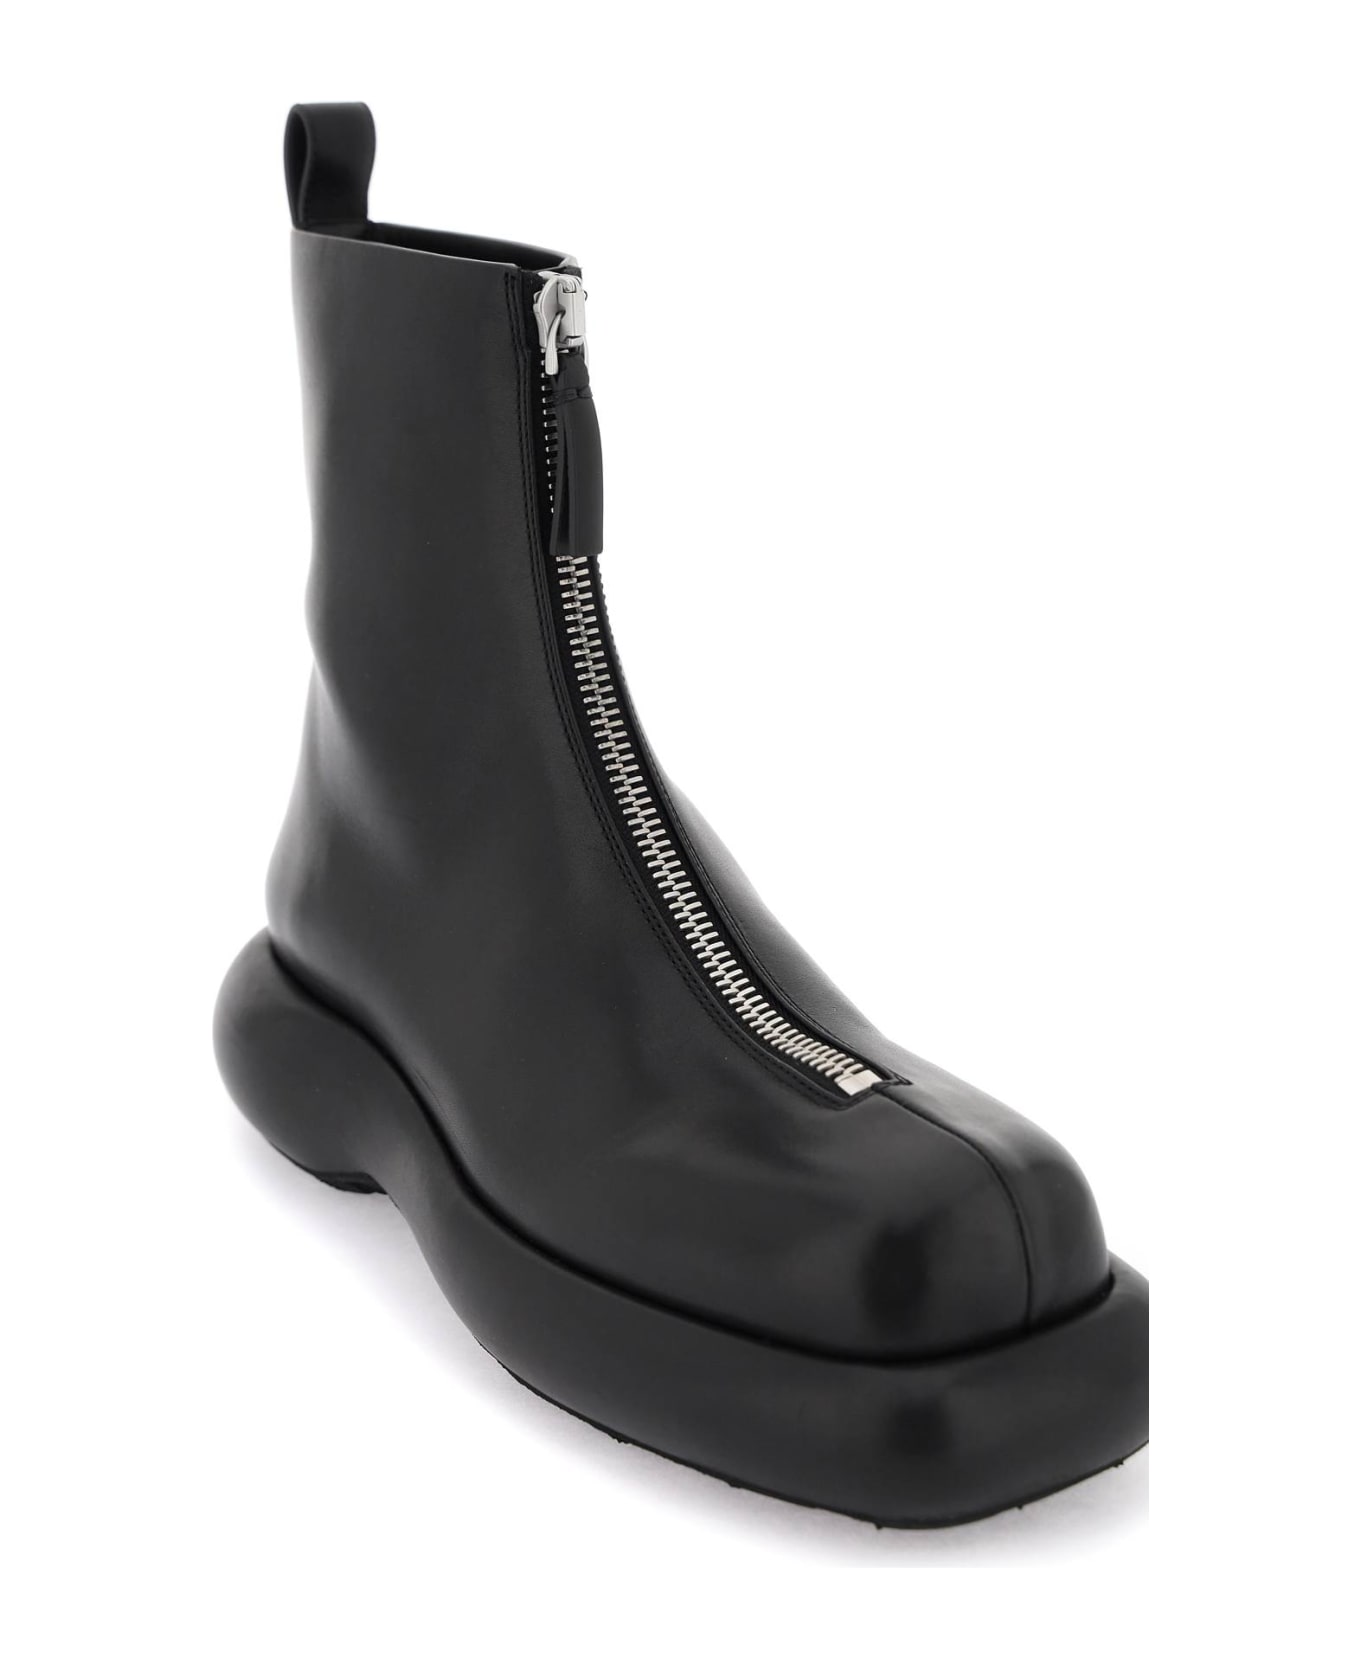 Jil Sander Combat Boots In Black Leather - 001 ブーツ